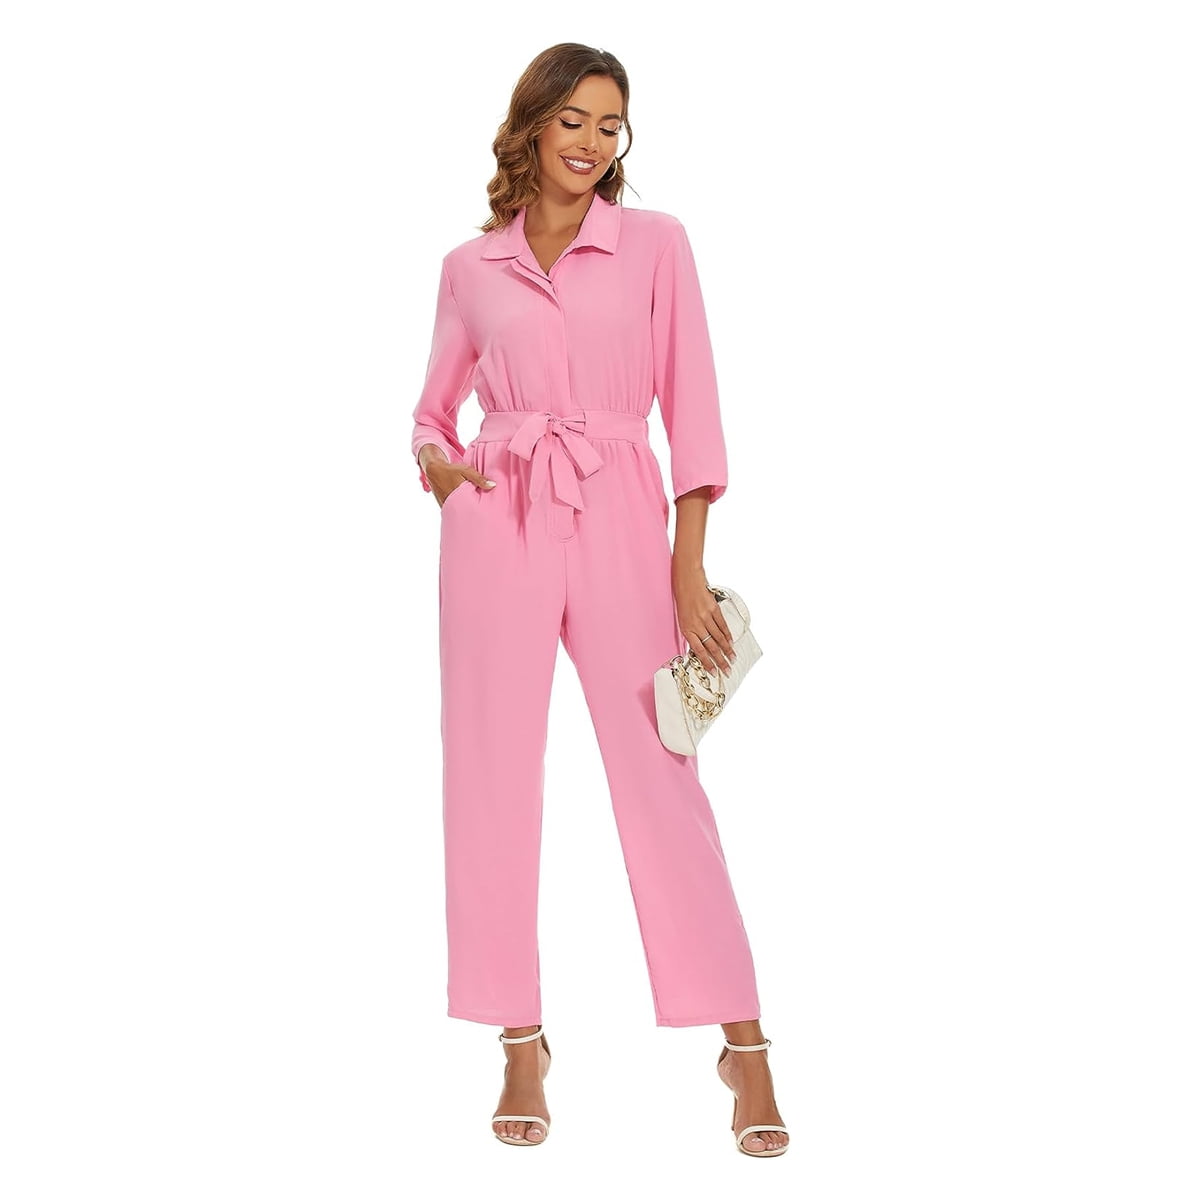 Pink Power Jumpsuit Costume for Women Pink Cowgirl Margot Robbie 2023 ...